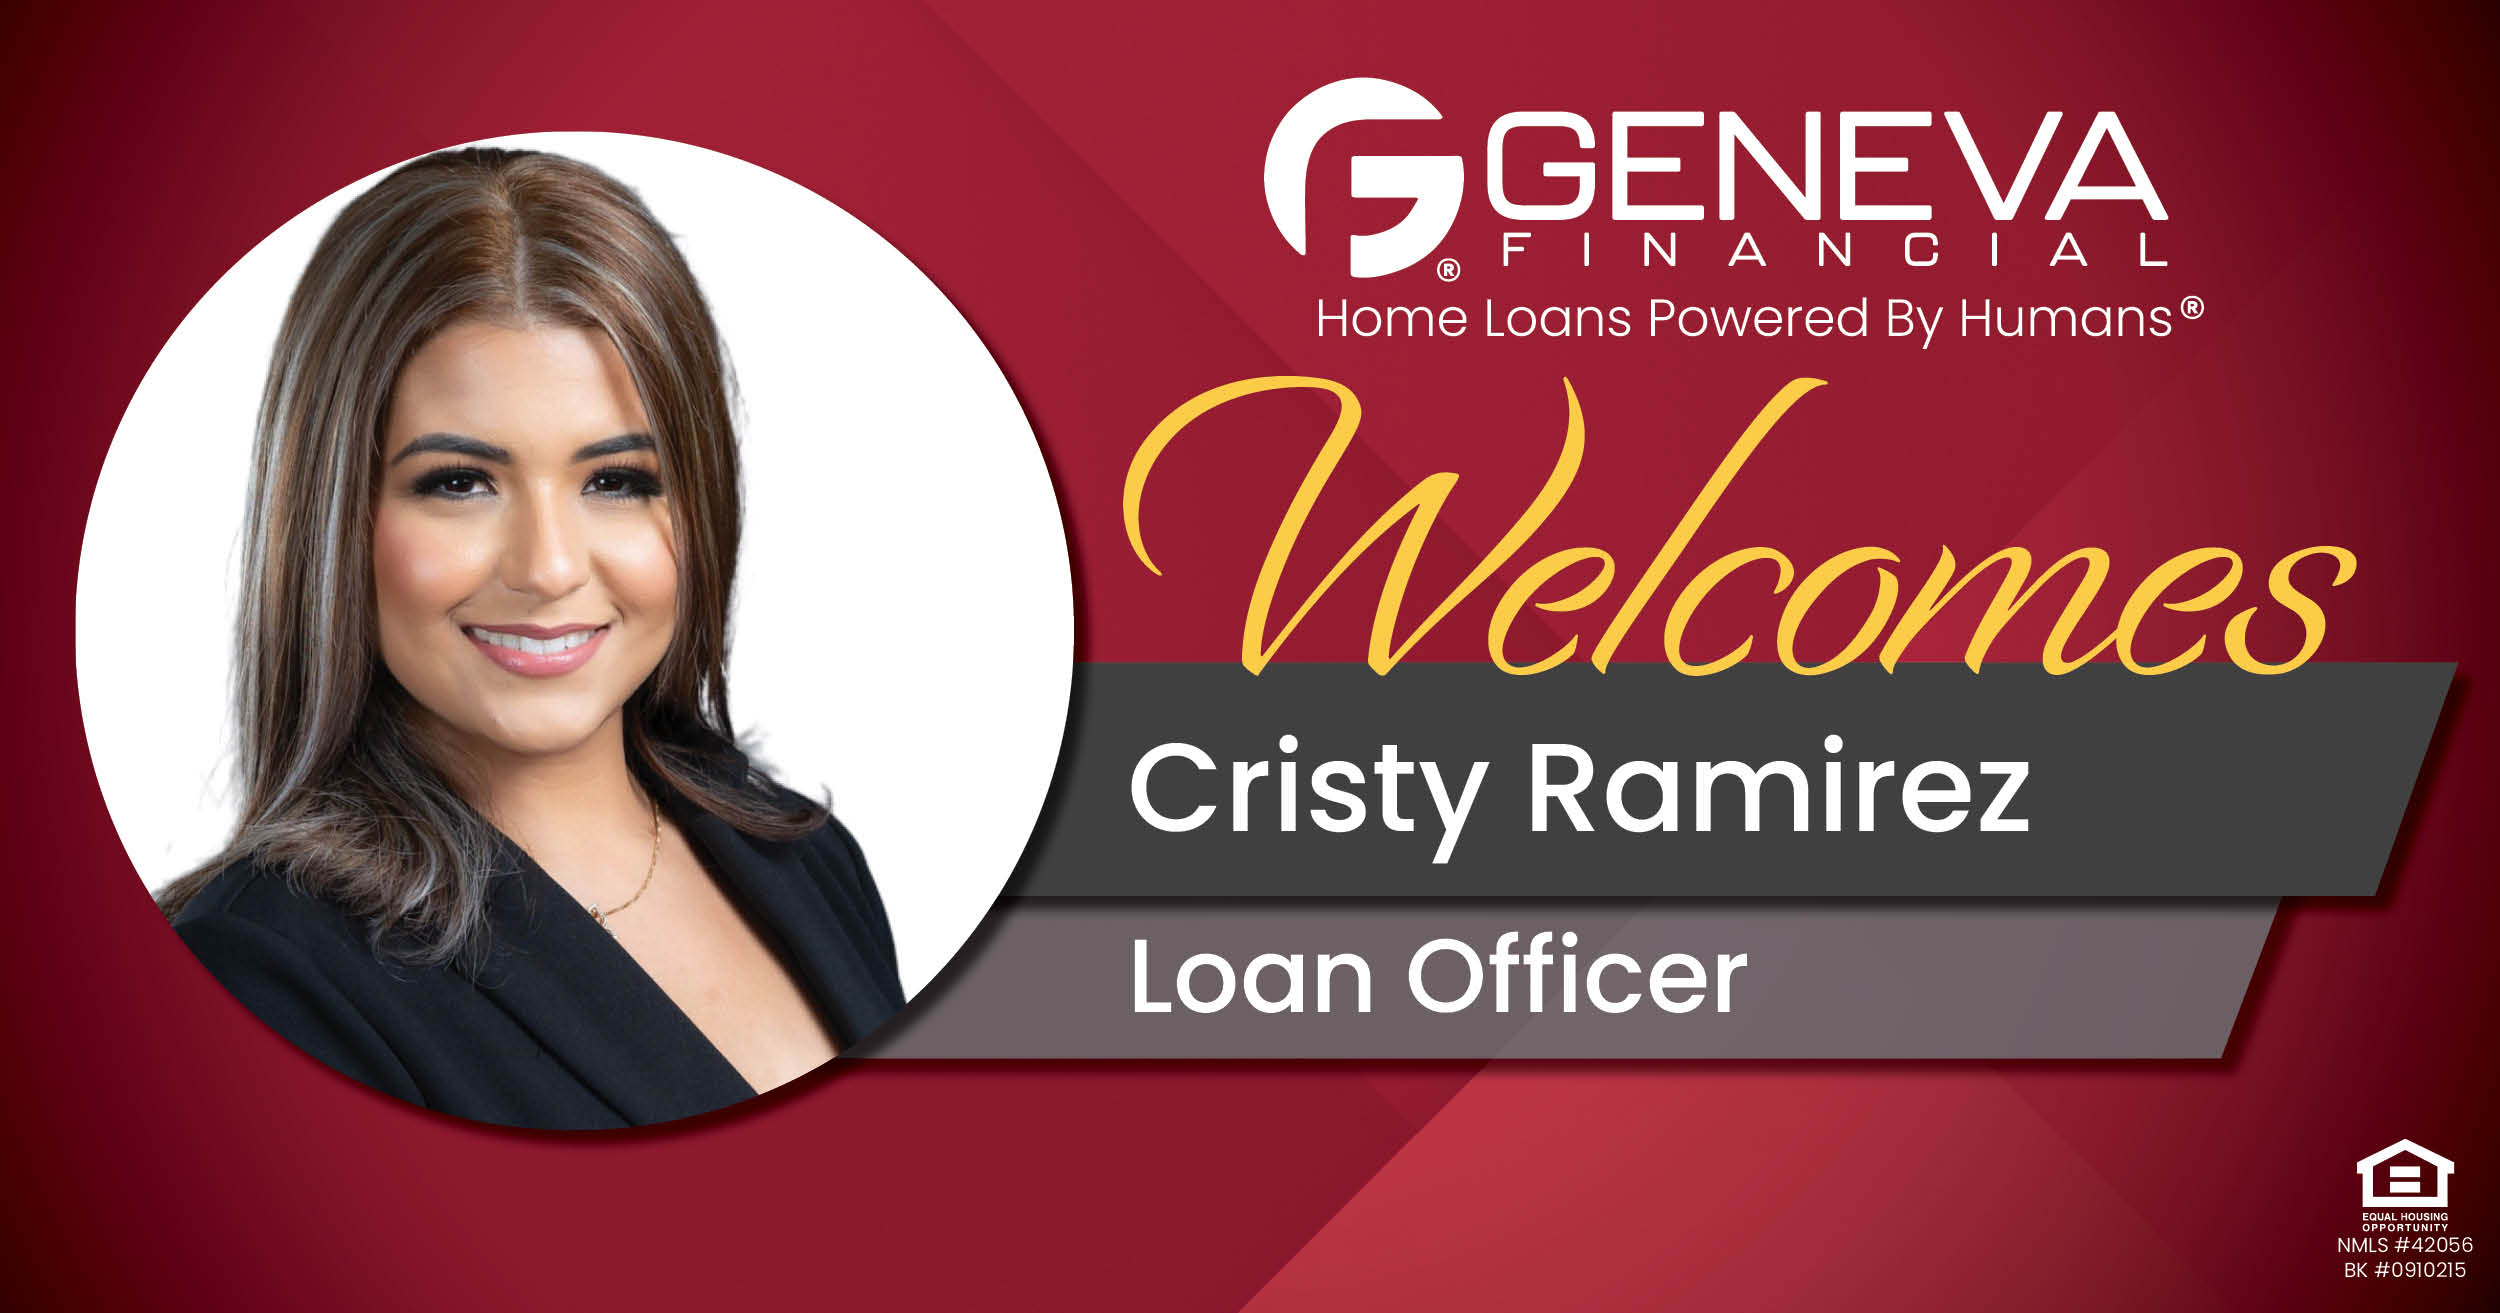 Geneva Financial Welcomes New Loan Officer Cristy Ramirez to Miami, FL – Home Loans Powered by Humans®.